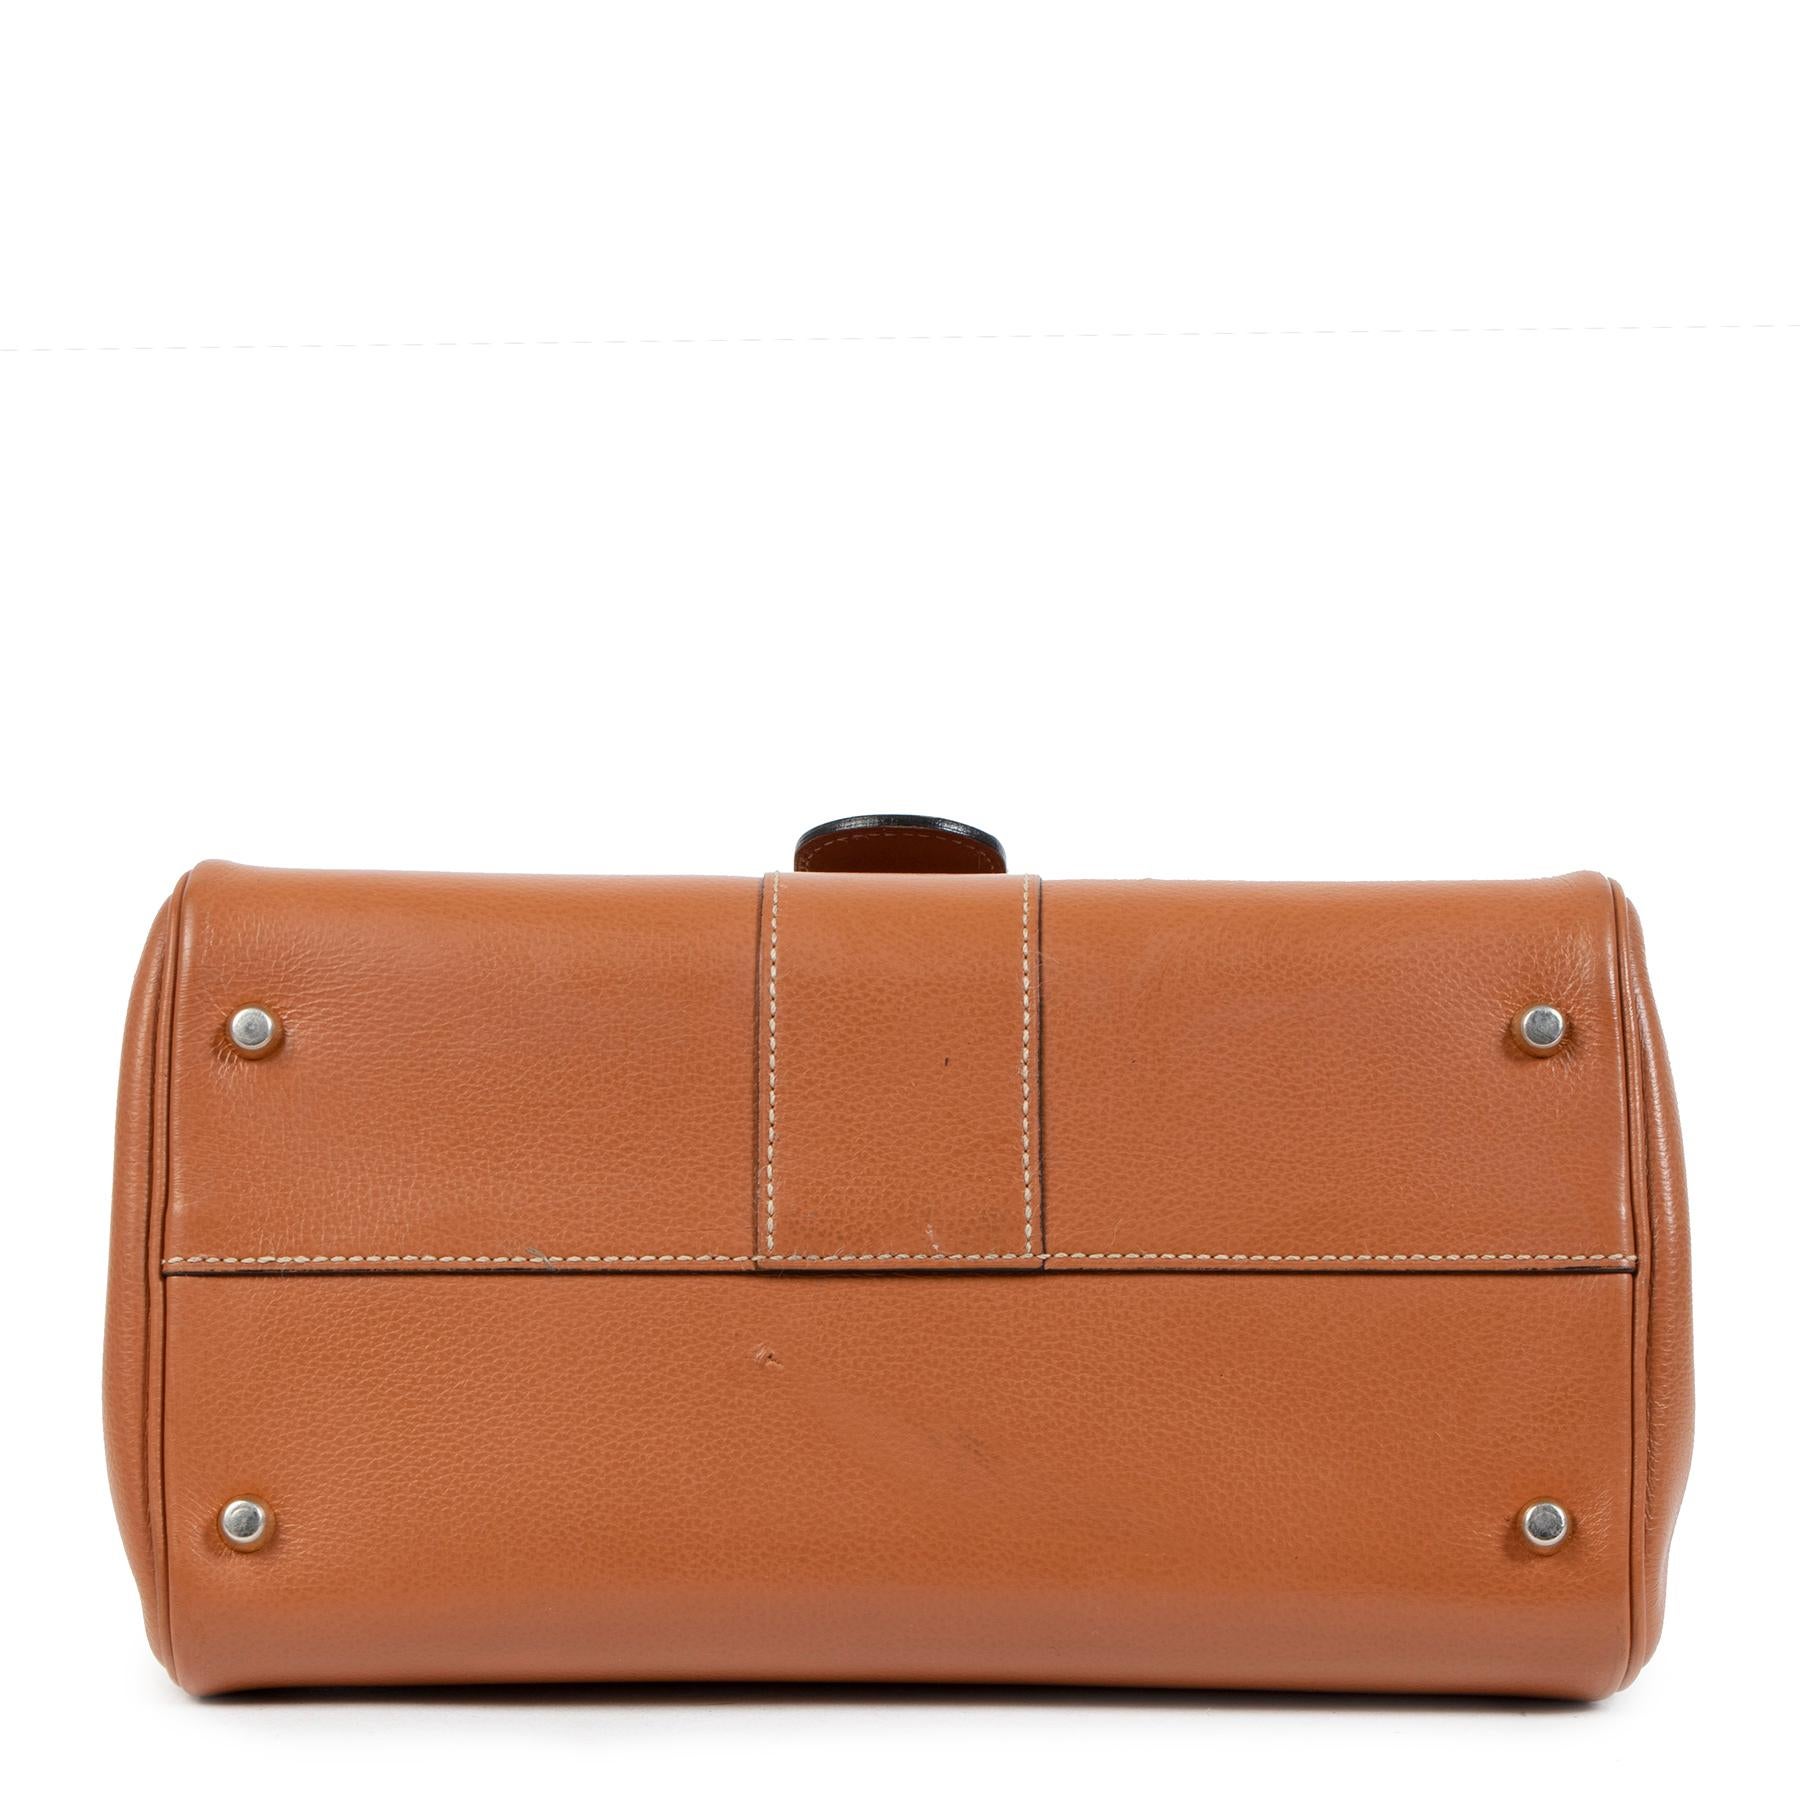 Delvaux Fauve Brillant PM  + Strap

This beautiful Delvaux Brillant bag is a timeless musthave! This iconic bag comes in a beautiful cognac color featuring gold toned hardware.
This bag can be worn by hand or over the shoulder. This is the perfect